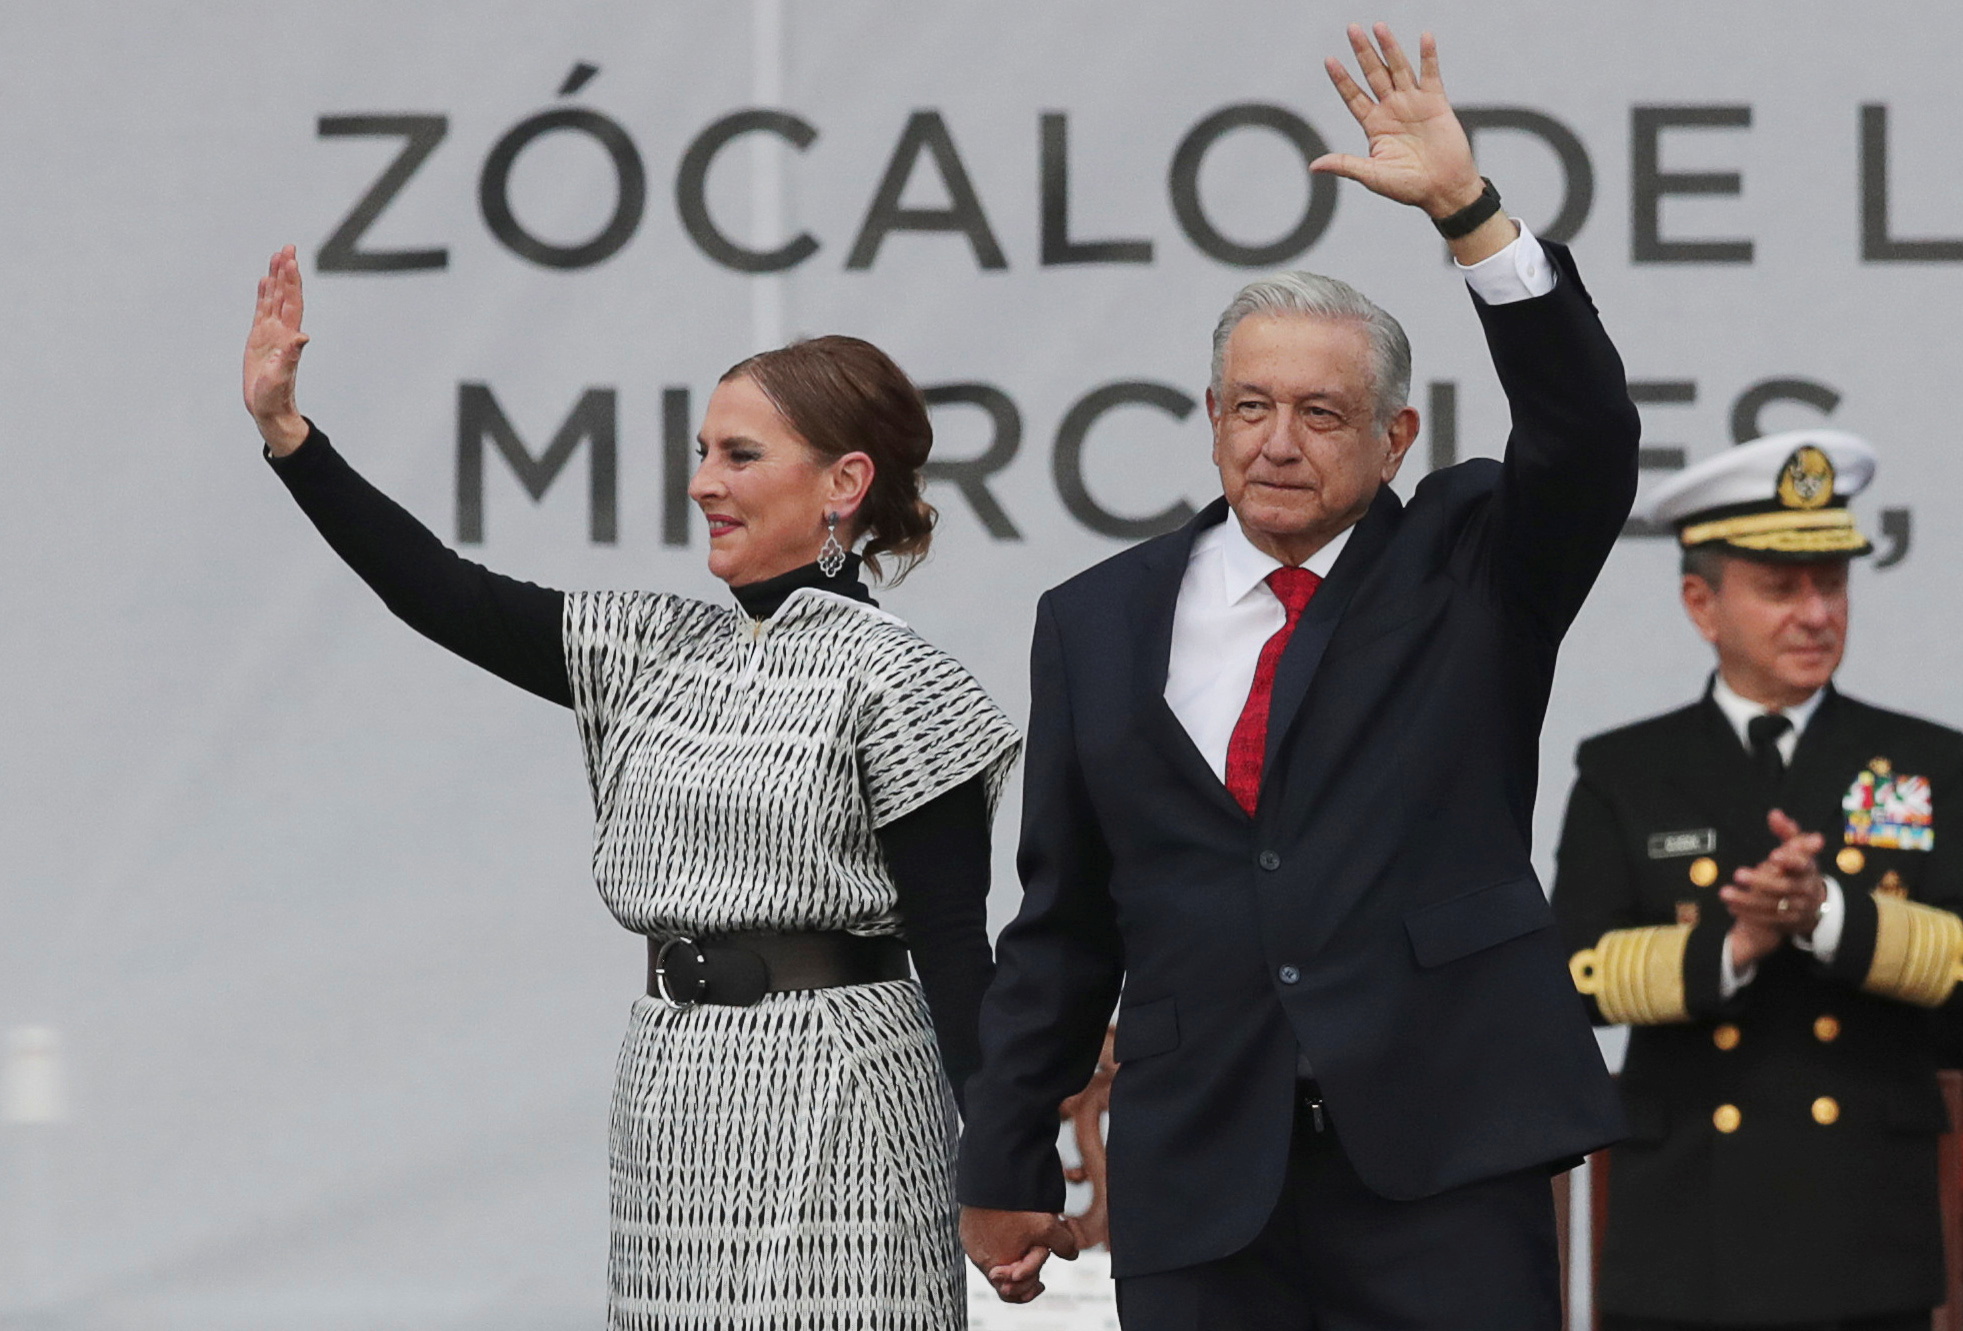 Mexico’s President Andres Manuel Lopez Obrador and his wife Beatriz Gutierrez Muller wave on stage  during an event on the third anniversary of his government in Mexico City, Mexico December 1, 2021. REUTERS/Henry Romero